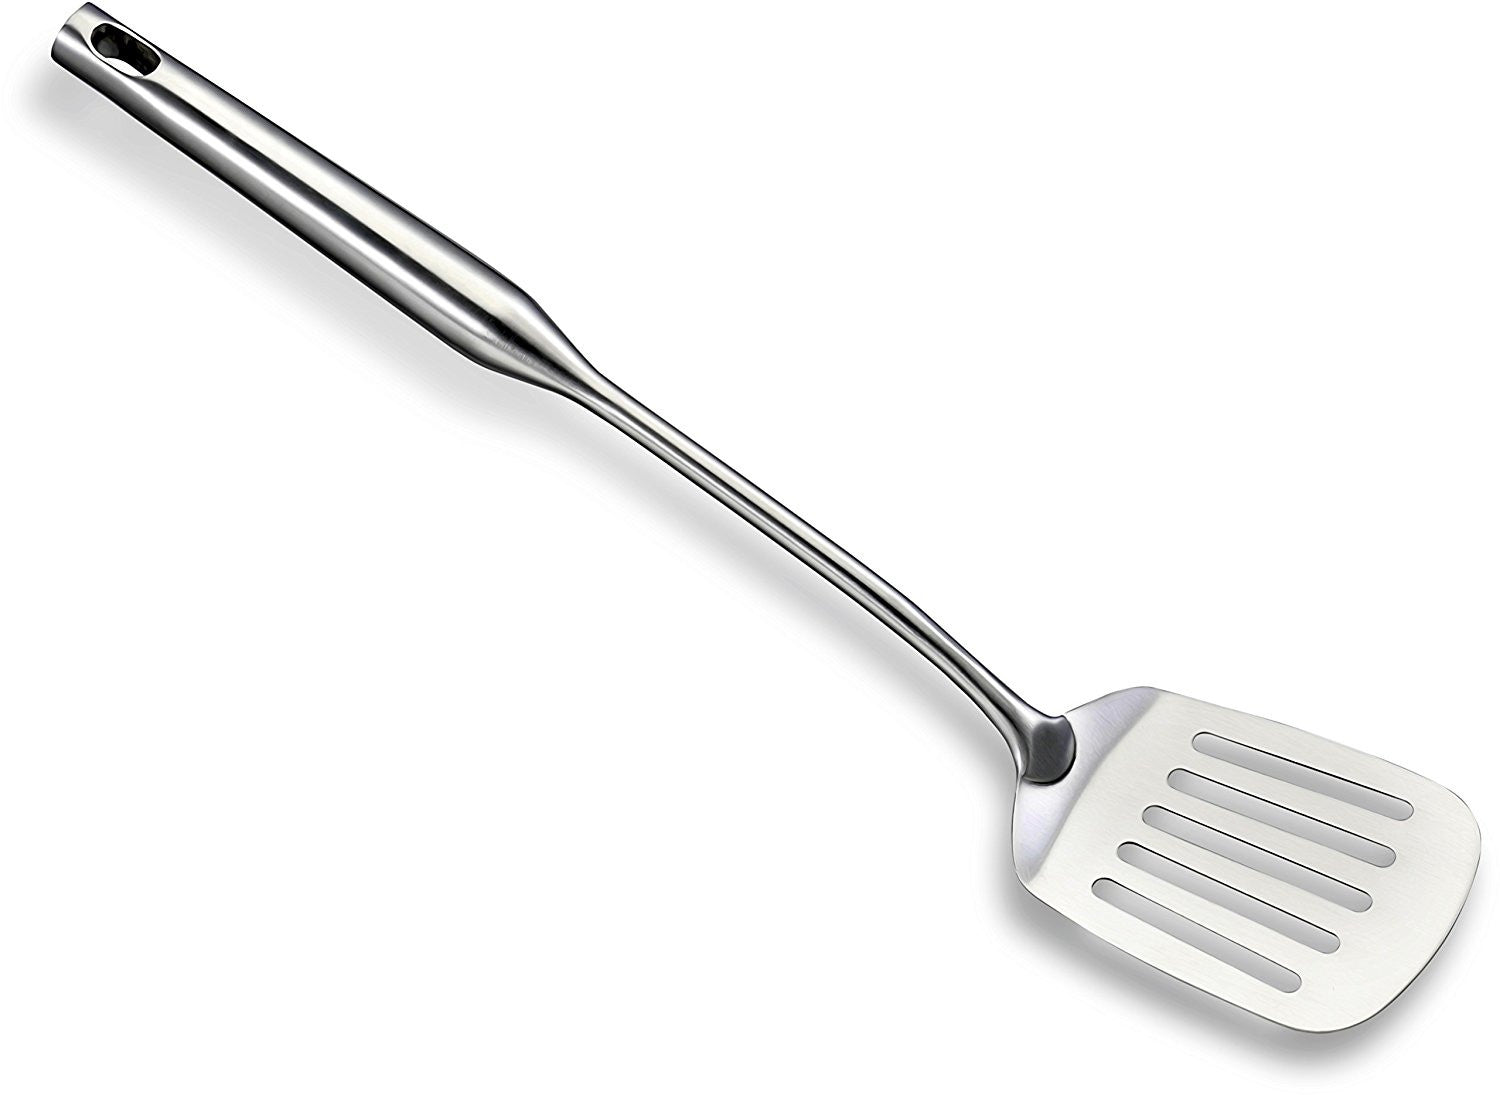 Pro Chef Kitchen Tools Stainless Steel Slotted Turner Spatula Cook